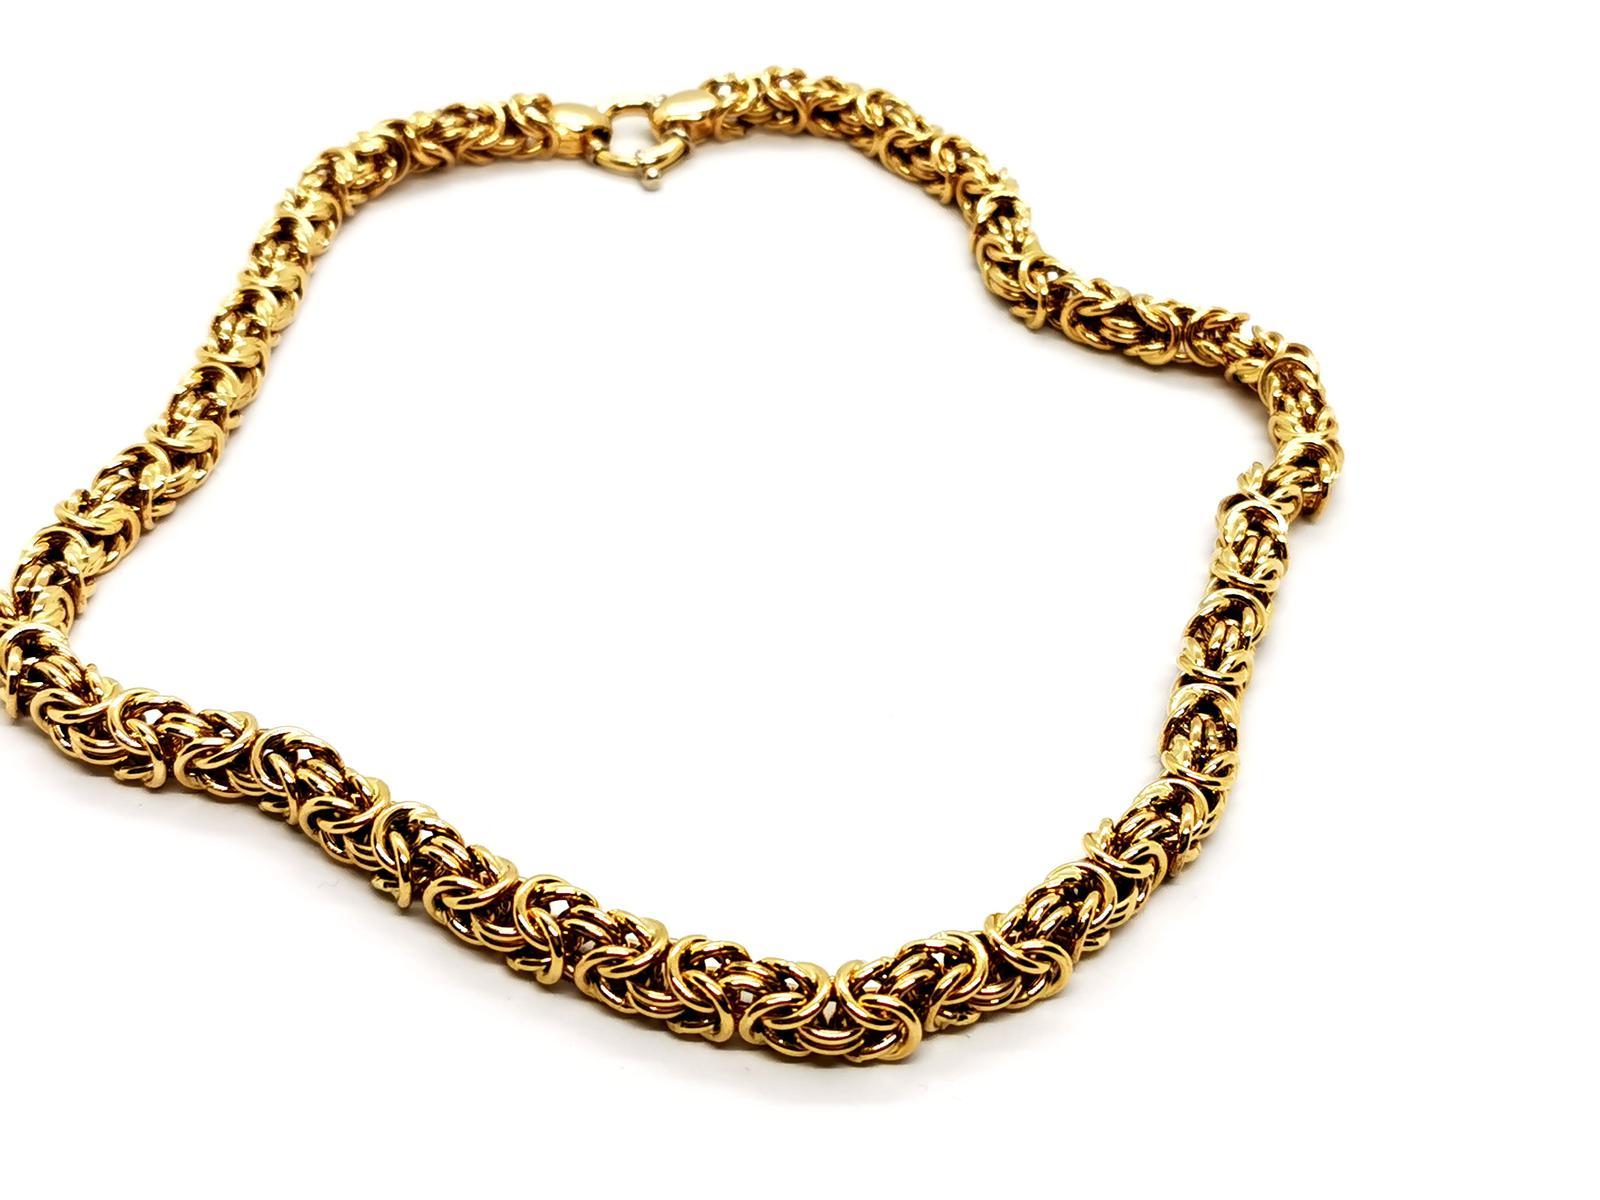 Gold necklace yellow 750 mils (18 carats). coarse mesh. length: 51 cm. width: 0.79 cm. clasp Boué. total weight: 57.08 g. punch eagle's head. excellent condition
